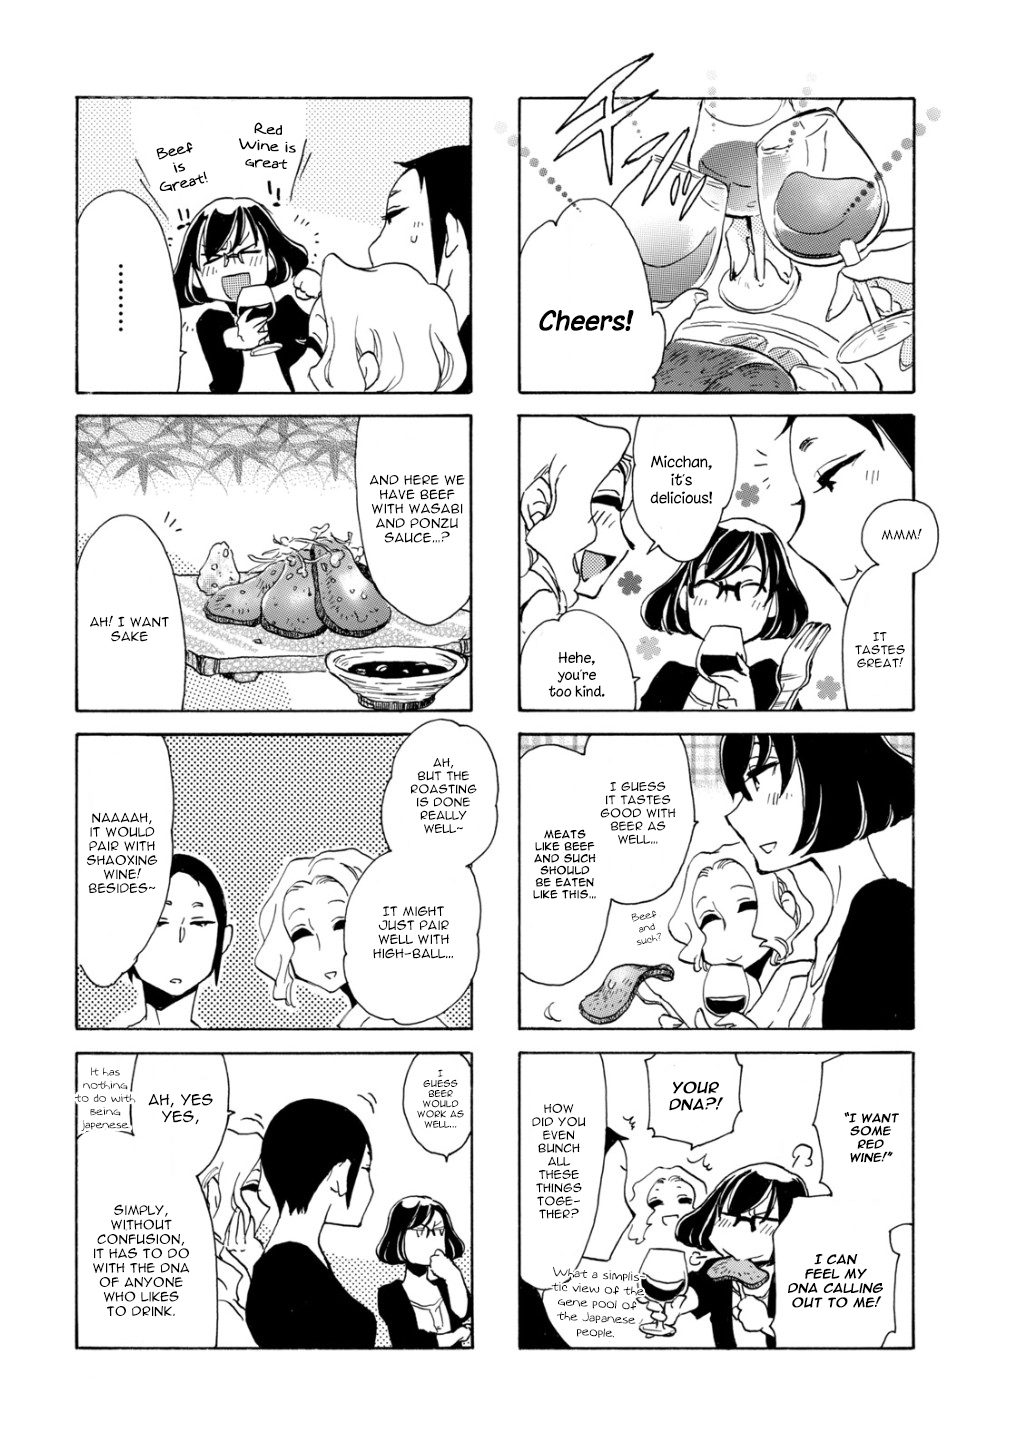 Nomi Joshi Vol. 2 Ch. 20 Micchan Chugs the House Down with Wine